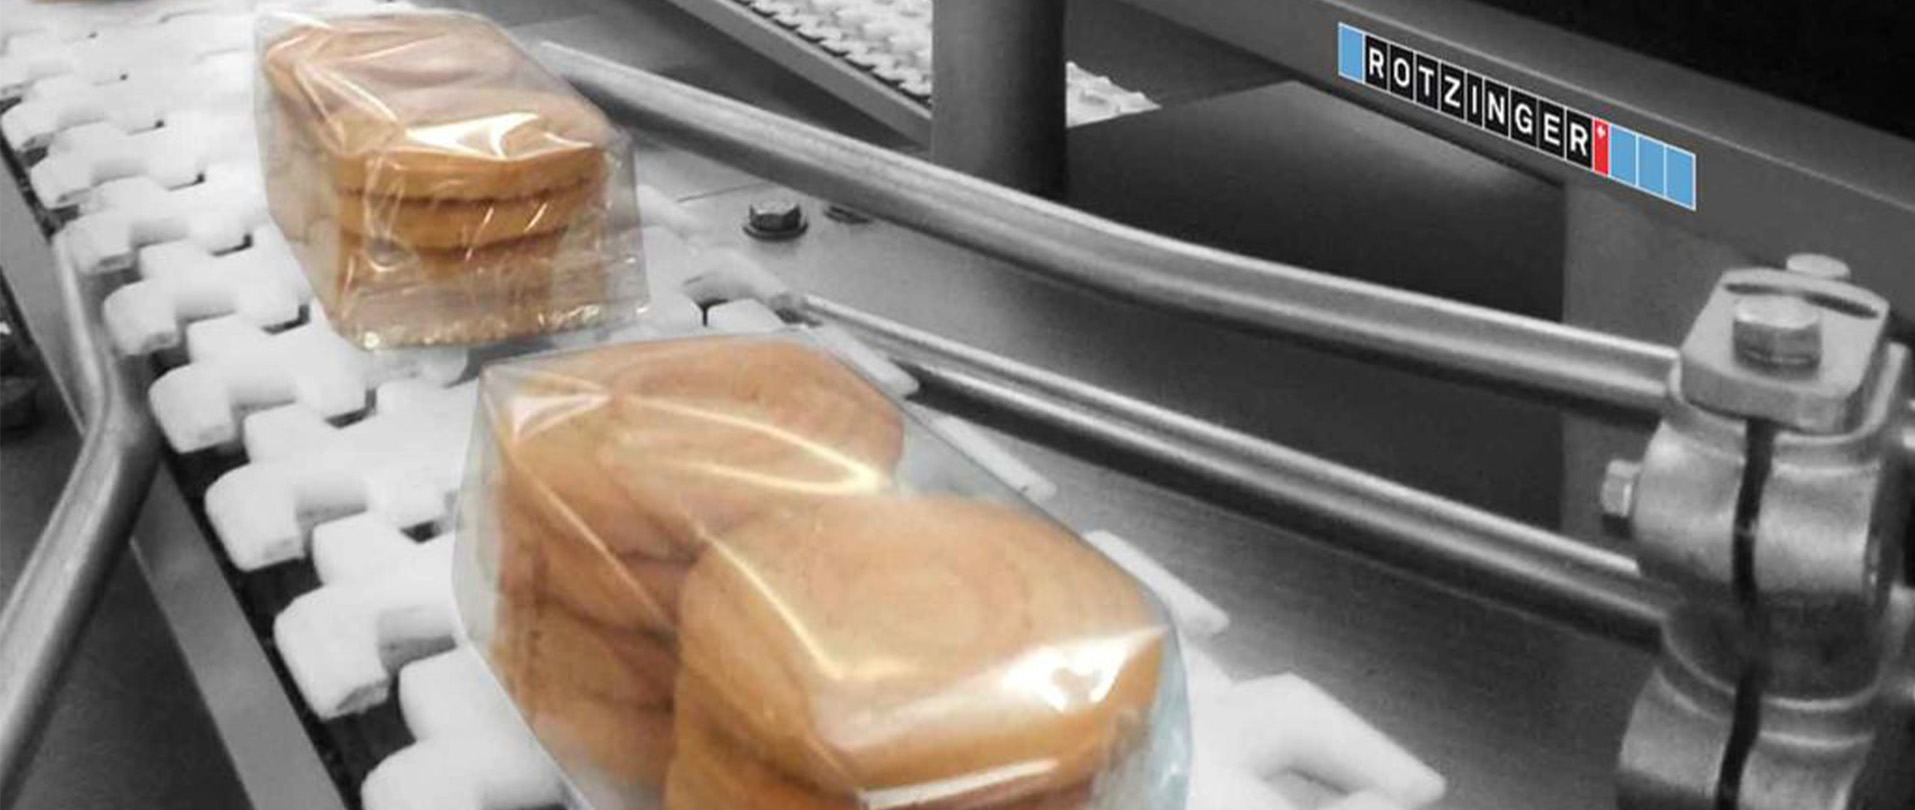 Packed bakery products on Rotzinger equipment for product flow regulation.